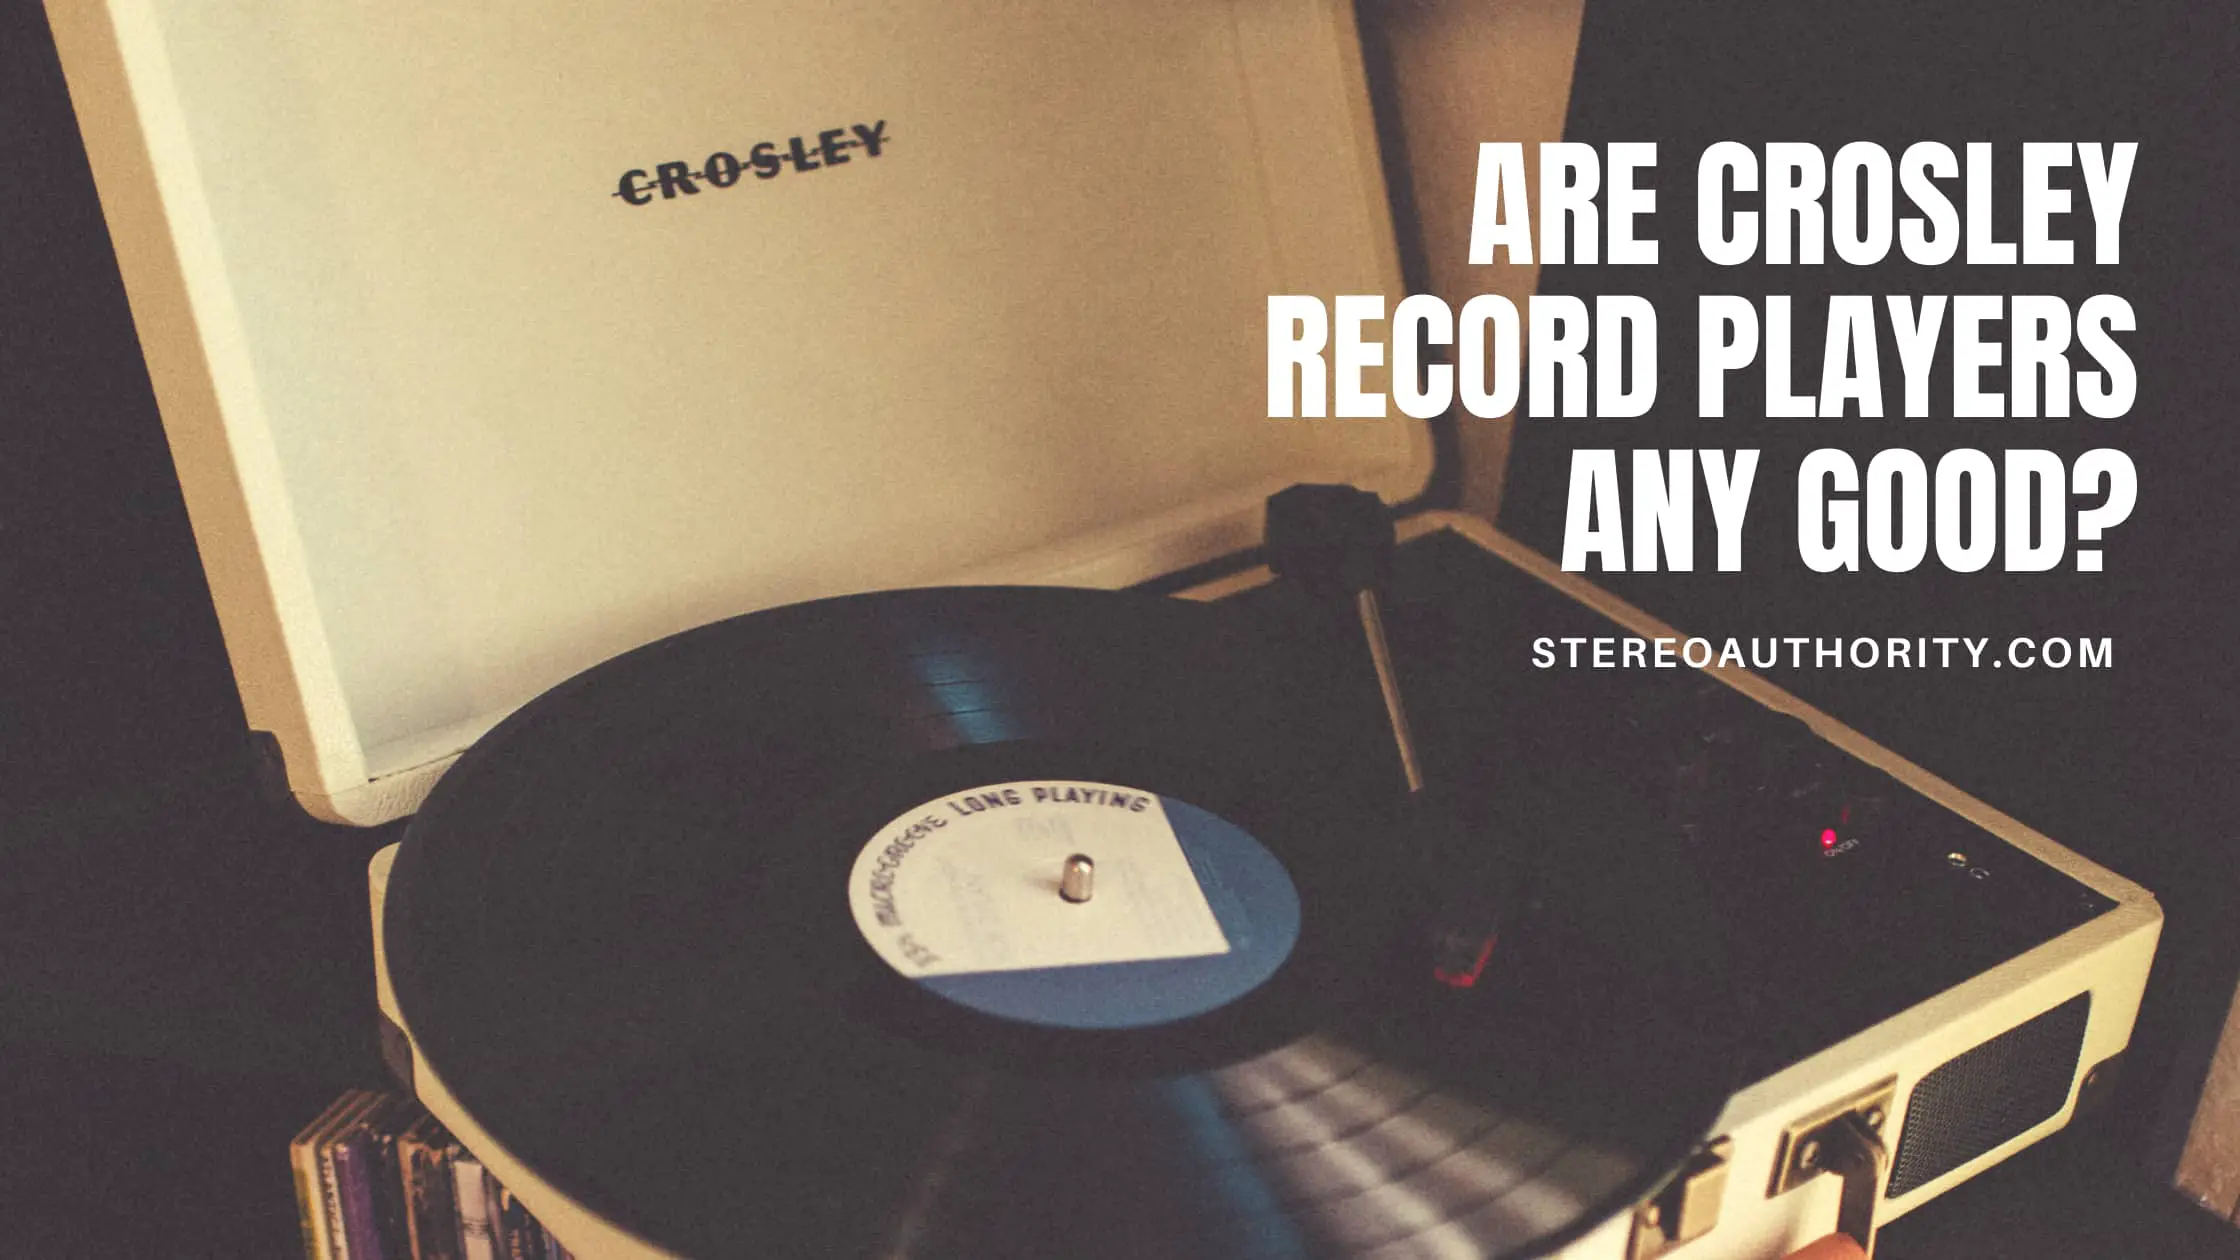 Are Crosley Record Players Good